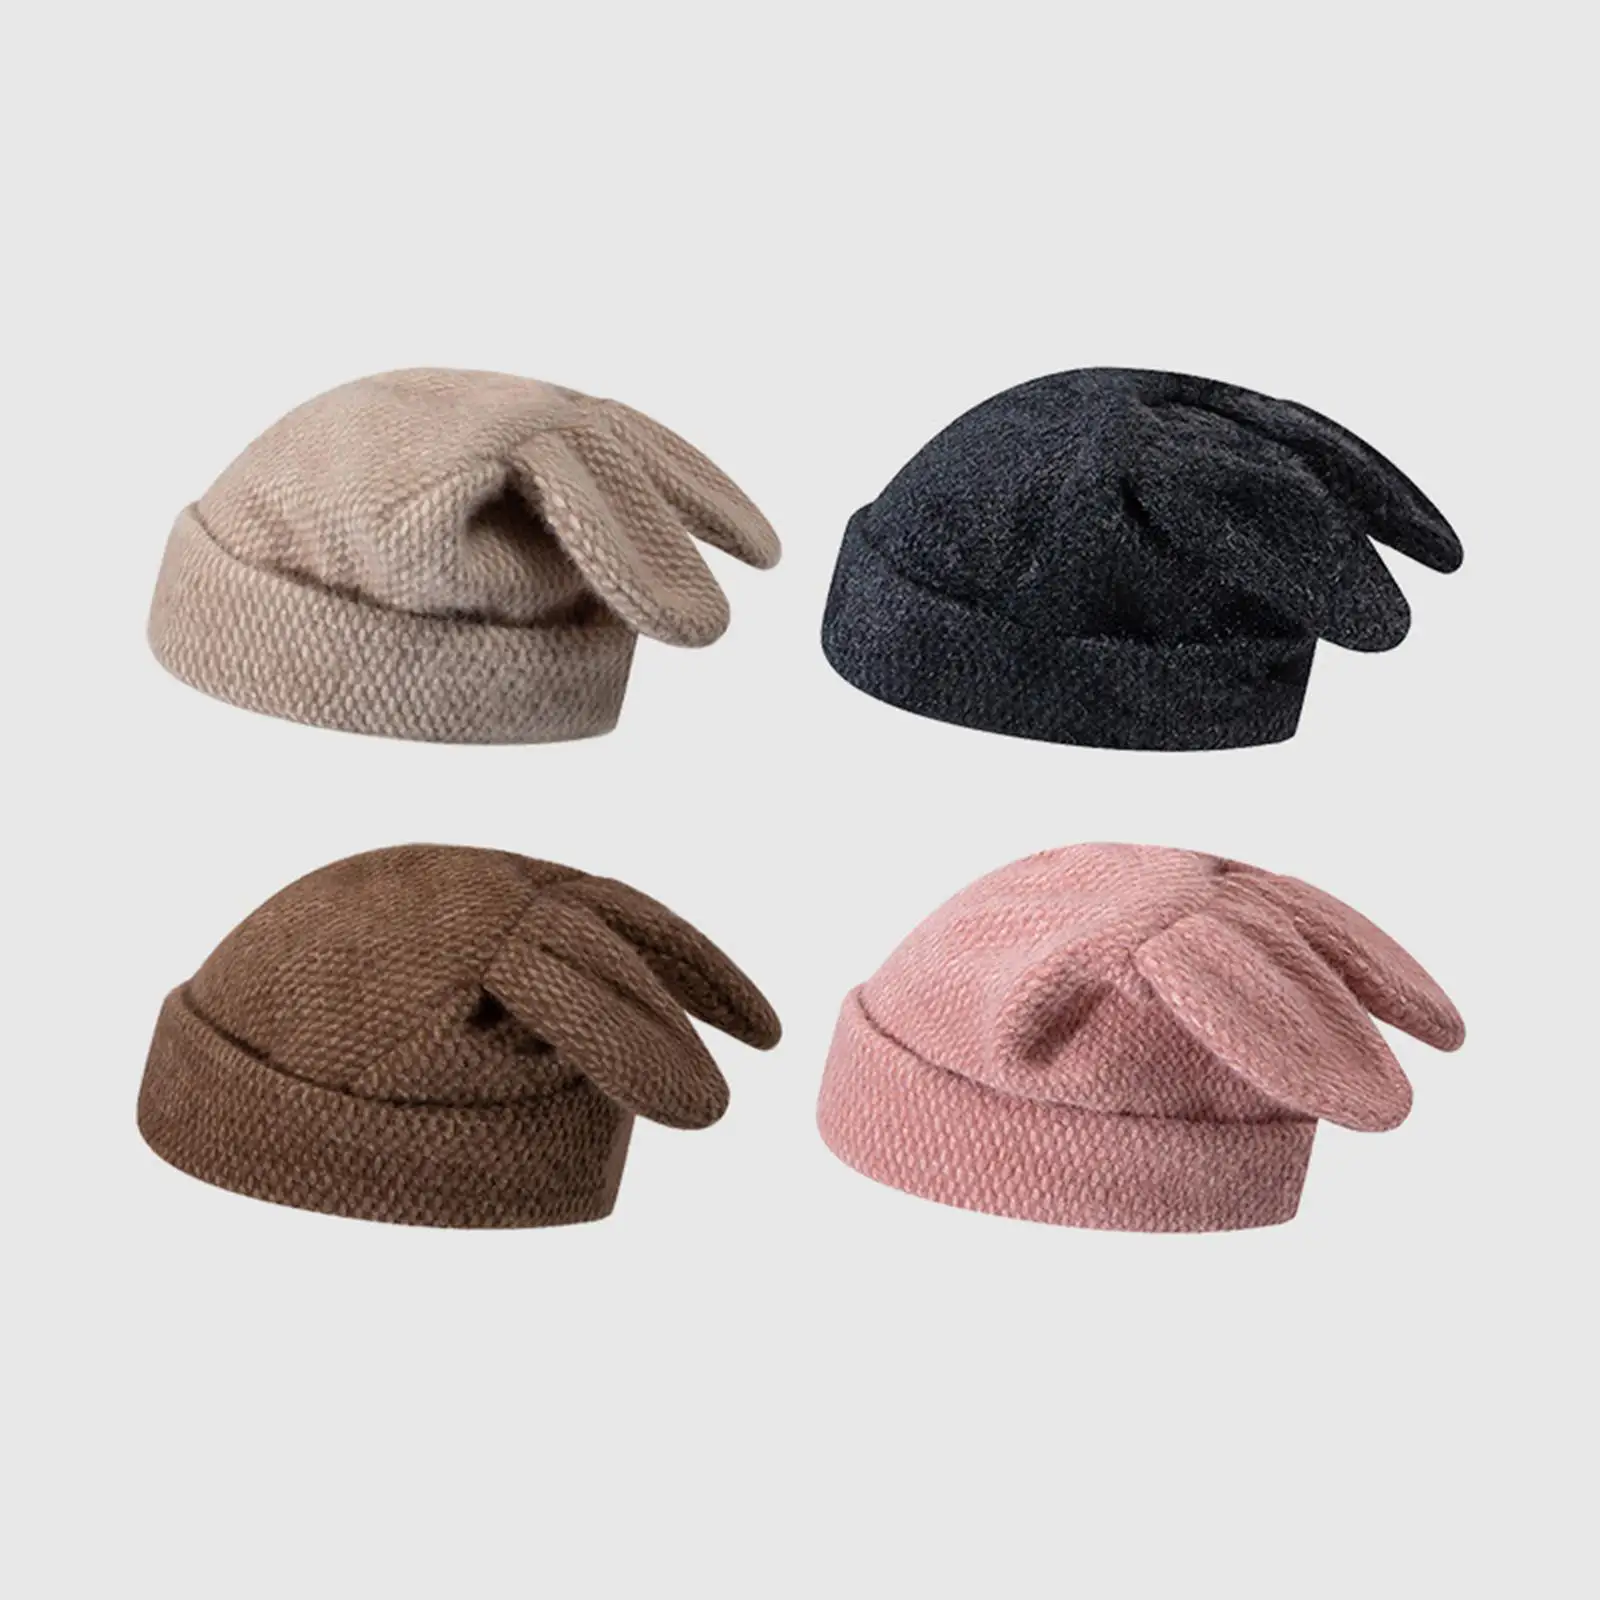 Rabbit Ear Knitted Hat Beanie Headgear Windproof Warm Hat Casual Knit Hat Winter Hat Winter Cold Cap for Camping Hiking Outdoor